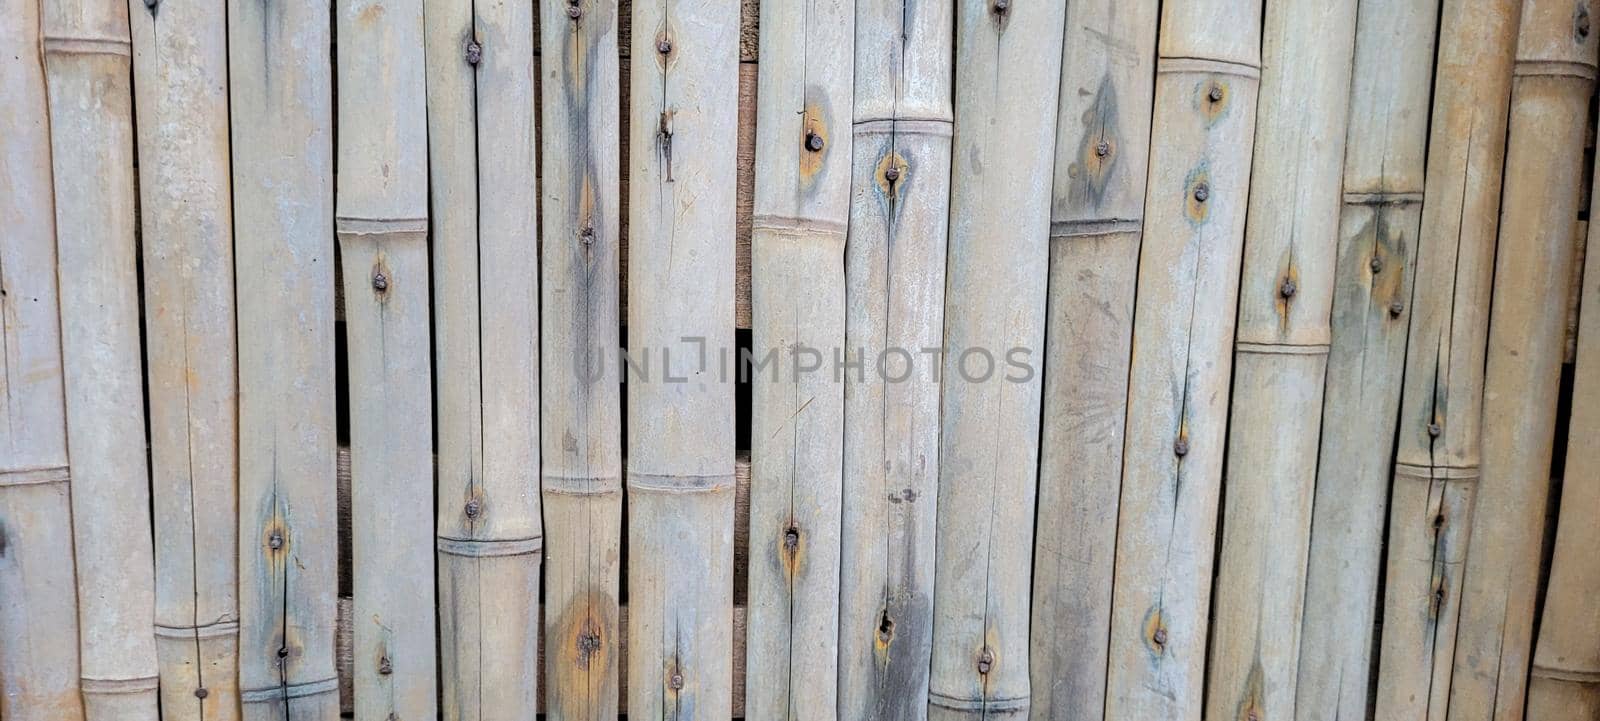 natural brazilian bamboo panel with shadow, which can be used as background